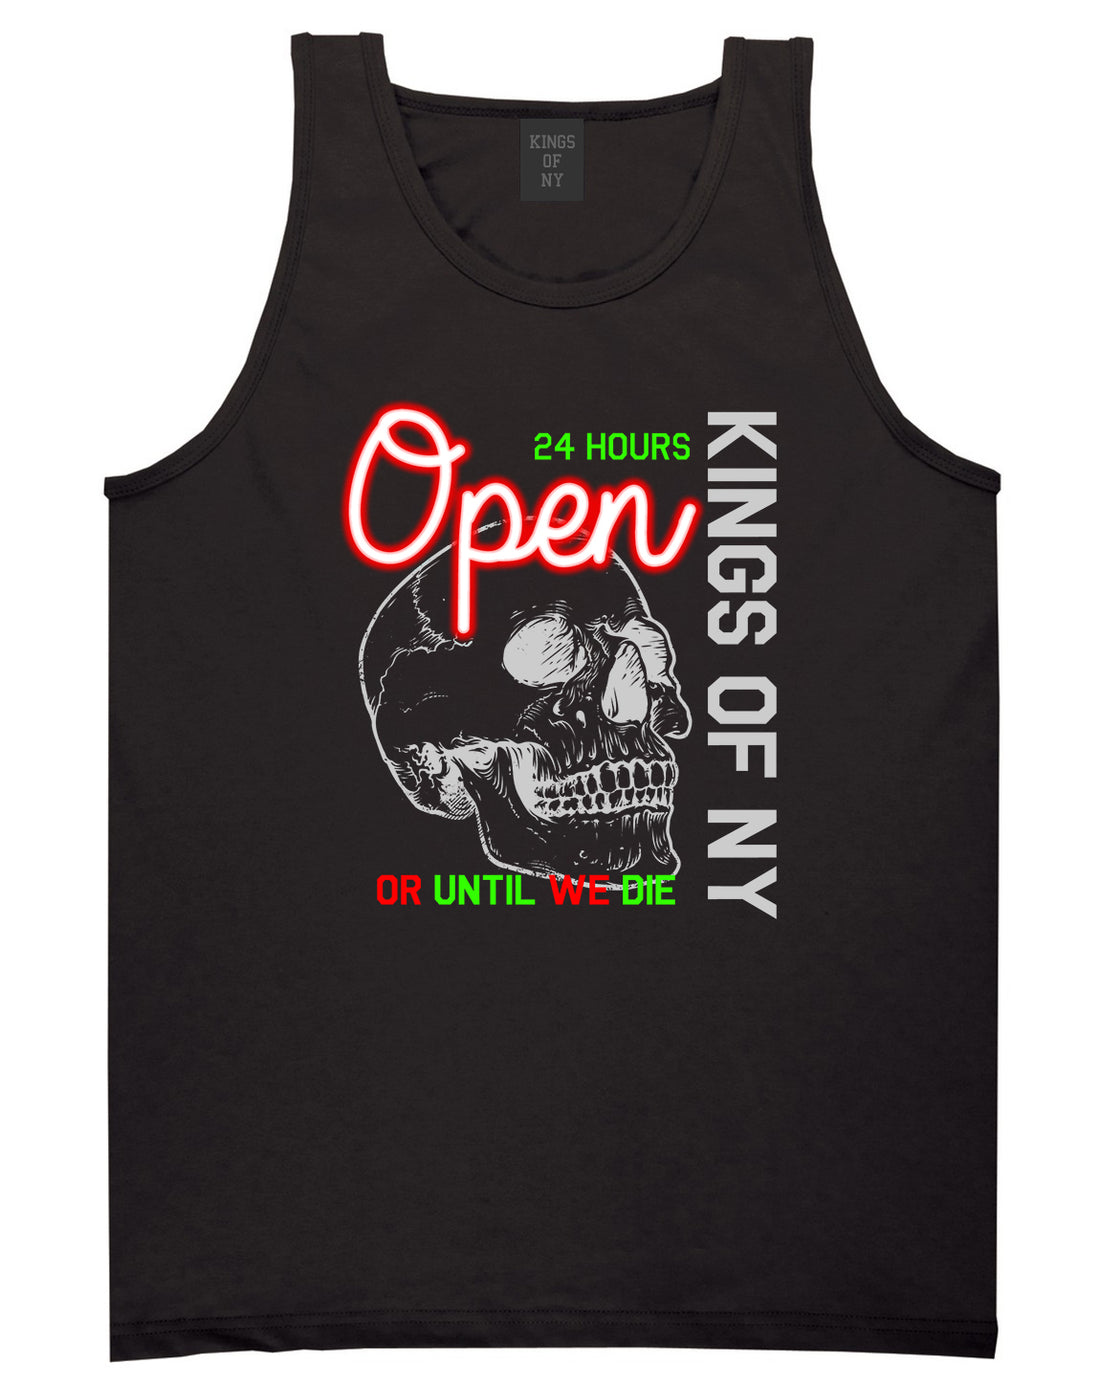 Open 24 Hours Sign Skull Mens Tank Top Shirt Black by Kings Of NY